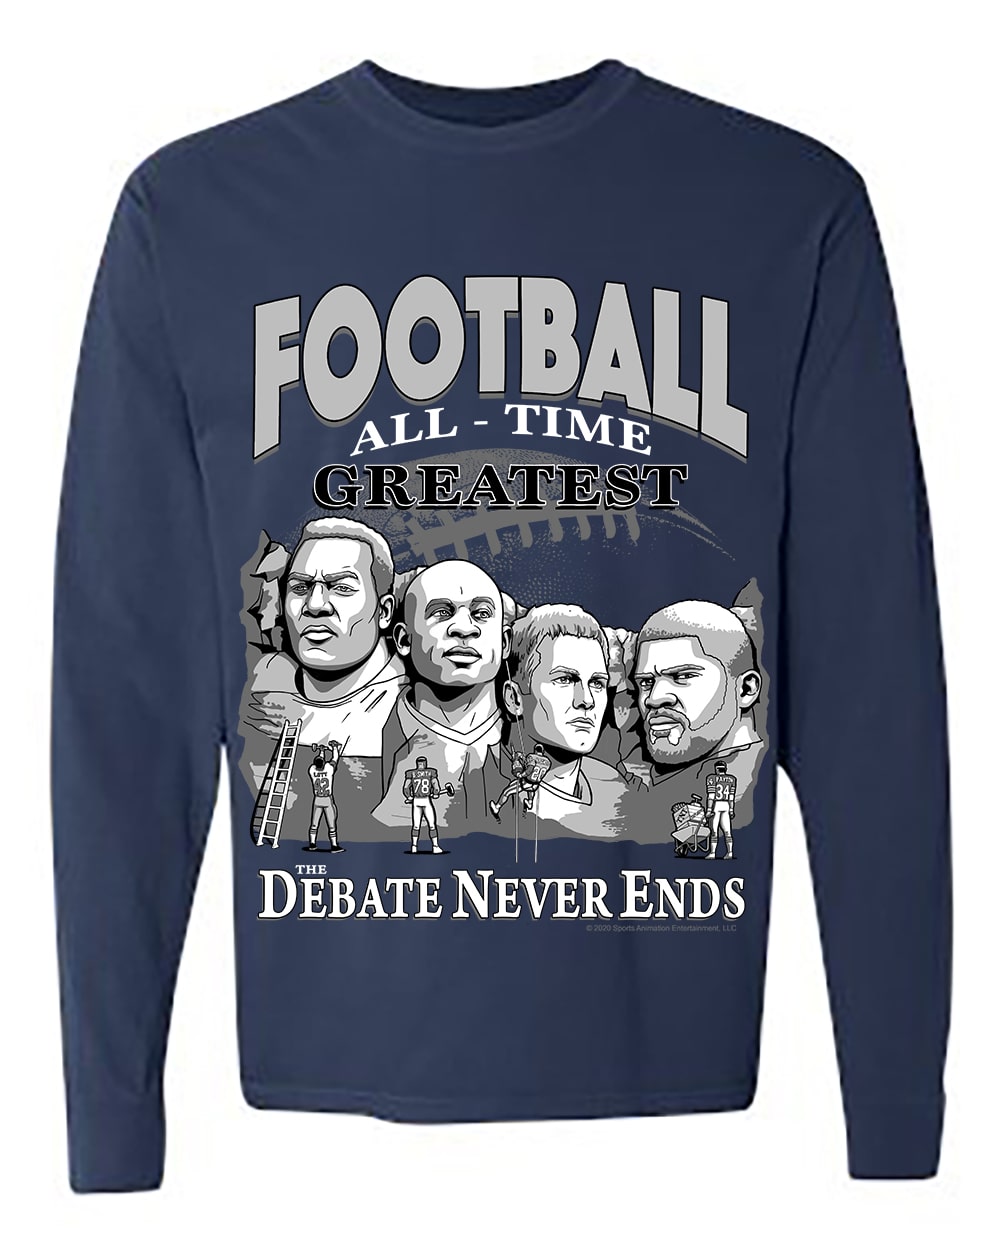 Mount Rushmore – Football All-Time Greatest (Navy Blue Long Sleeve Shirt)